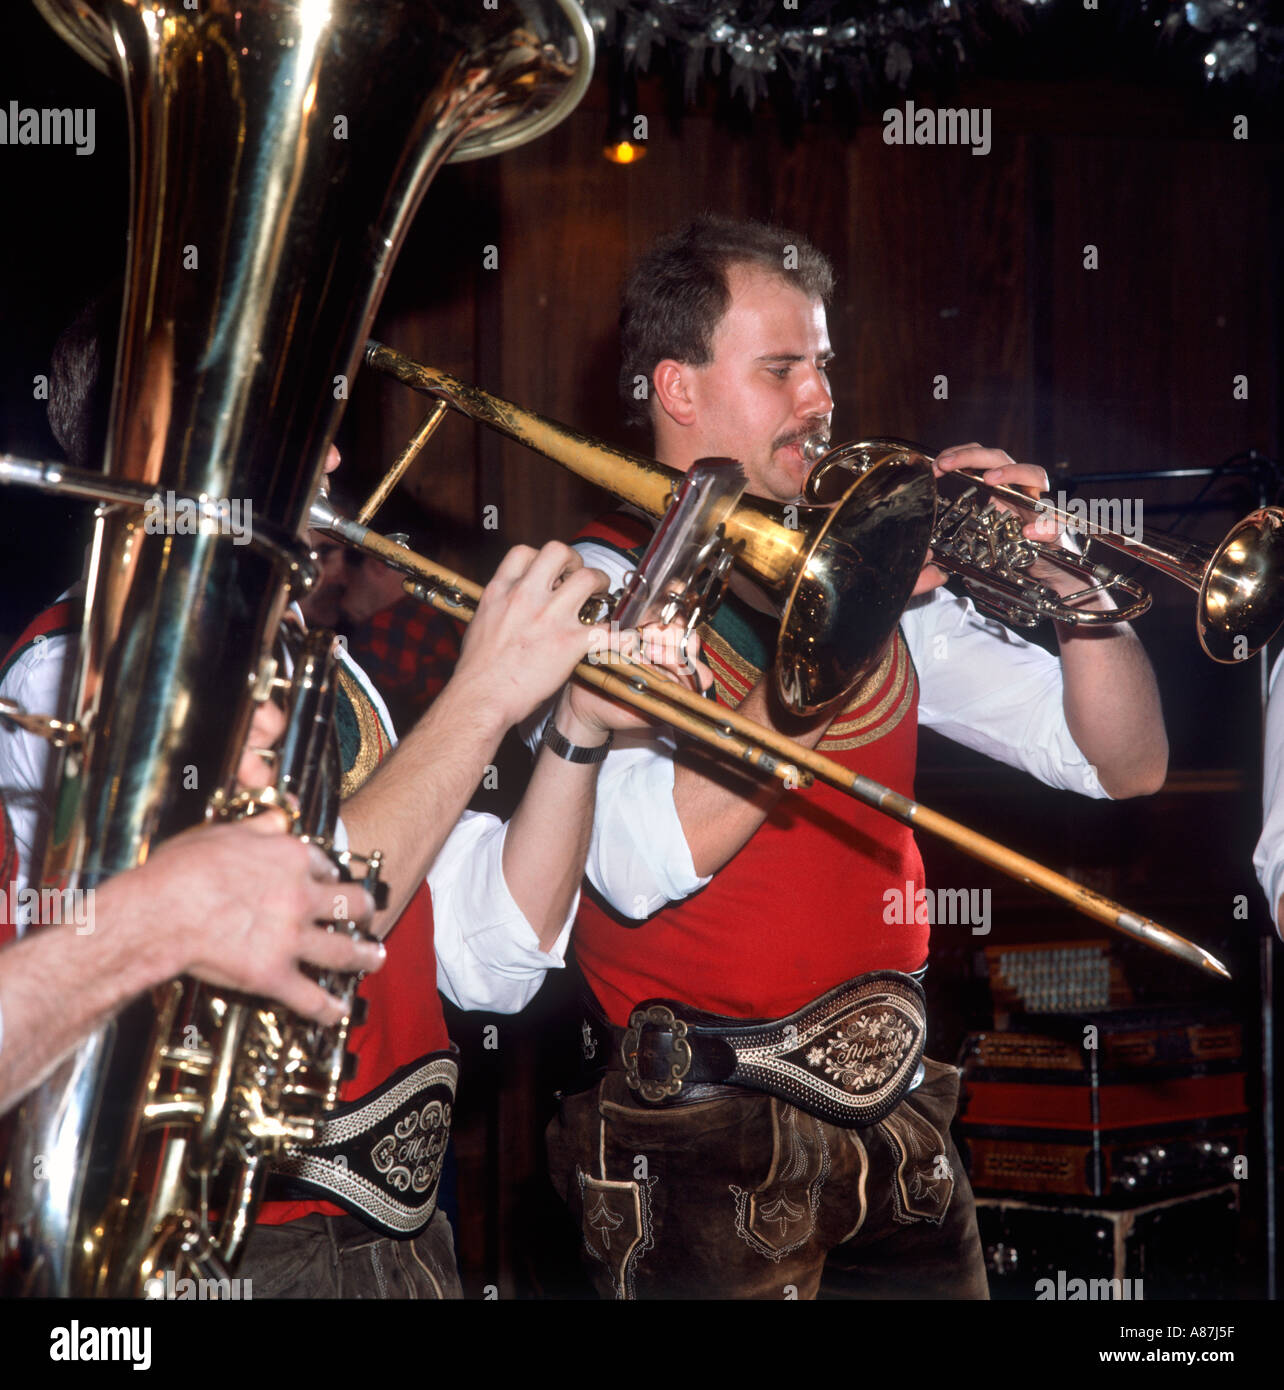 Musicians in traditiona coustume at a Tyrolean evening, Alpbach, Tyrol, Austrian Alps, Austria Stock Photo